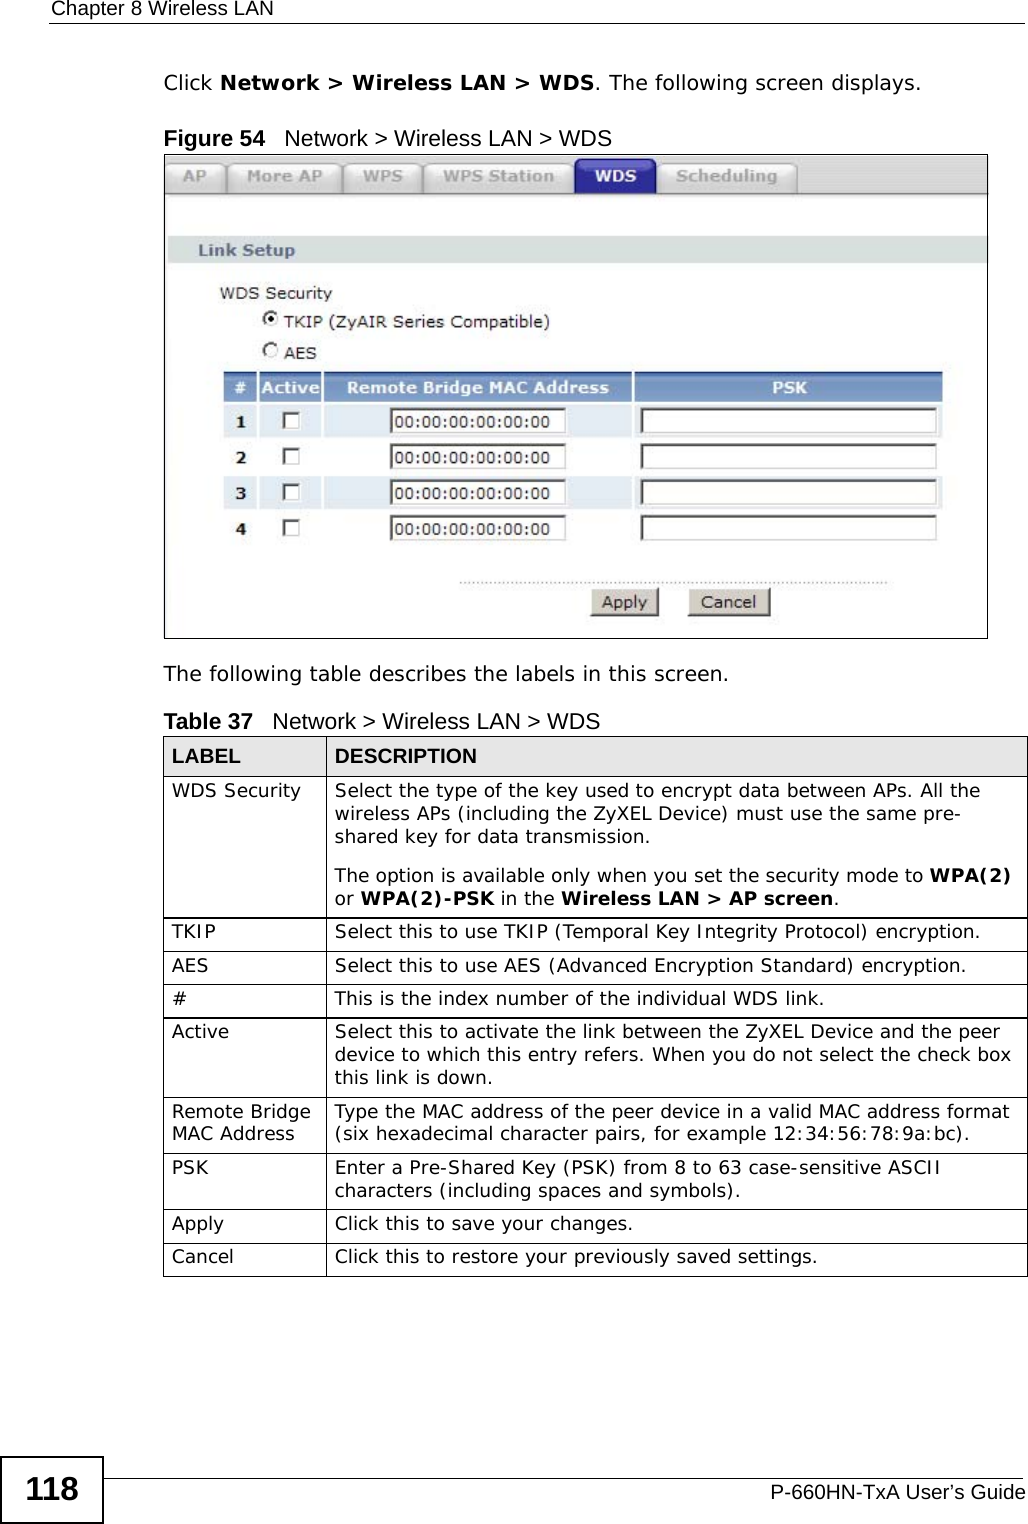 Chapter 8 Wireless LANP-660HN-TxA User’s Guide118Click Network &gt; Wireless LAN &gt; WDS. The following screen displays.Figure 54   Network &gt; Wireless LAN &gt; WDSThe following table describes the labels in this screen.Table 37   Network &gt; Wireless LAN &gt; WDSLABEL DESCRIPTIONWDS Security Select the type of the key used to encrypt data between APs. All the wireless APs (including the ZyXEL Device) must use the same pre-shared key for data transmission.The option is available only when you set the security mode to WPA(2) or WPA(2)-PSK in the Wireless LAN &gt; AP screen.TKIP Select this to use TKIP (Temporal Key Integrity Protocol) encryption.AES Select this to use AES (Advanced Encryption Standard) encryption. # This is the index number of the individual WDS link.Active Select this to activate the link between the ZyXEL Device and the peer device to which this entry refers. When you do not select the check box this link is down.Remote Bridge MAC Address Type the MAC address of the peer device in a valid MAC address format (six hexadecimal character pairs, for example 12:34:56:78:9a:bc).PSK Enter a Pre-Shared Key (PSK) from 8 to 63 case-sensitive ASCII characters (including spaces and symbols).Apply Click this to save your changes.Cancel Click this to restore your previously saved settings.